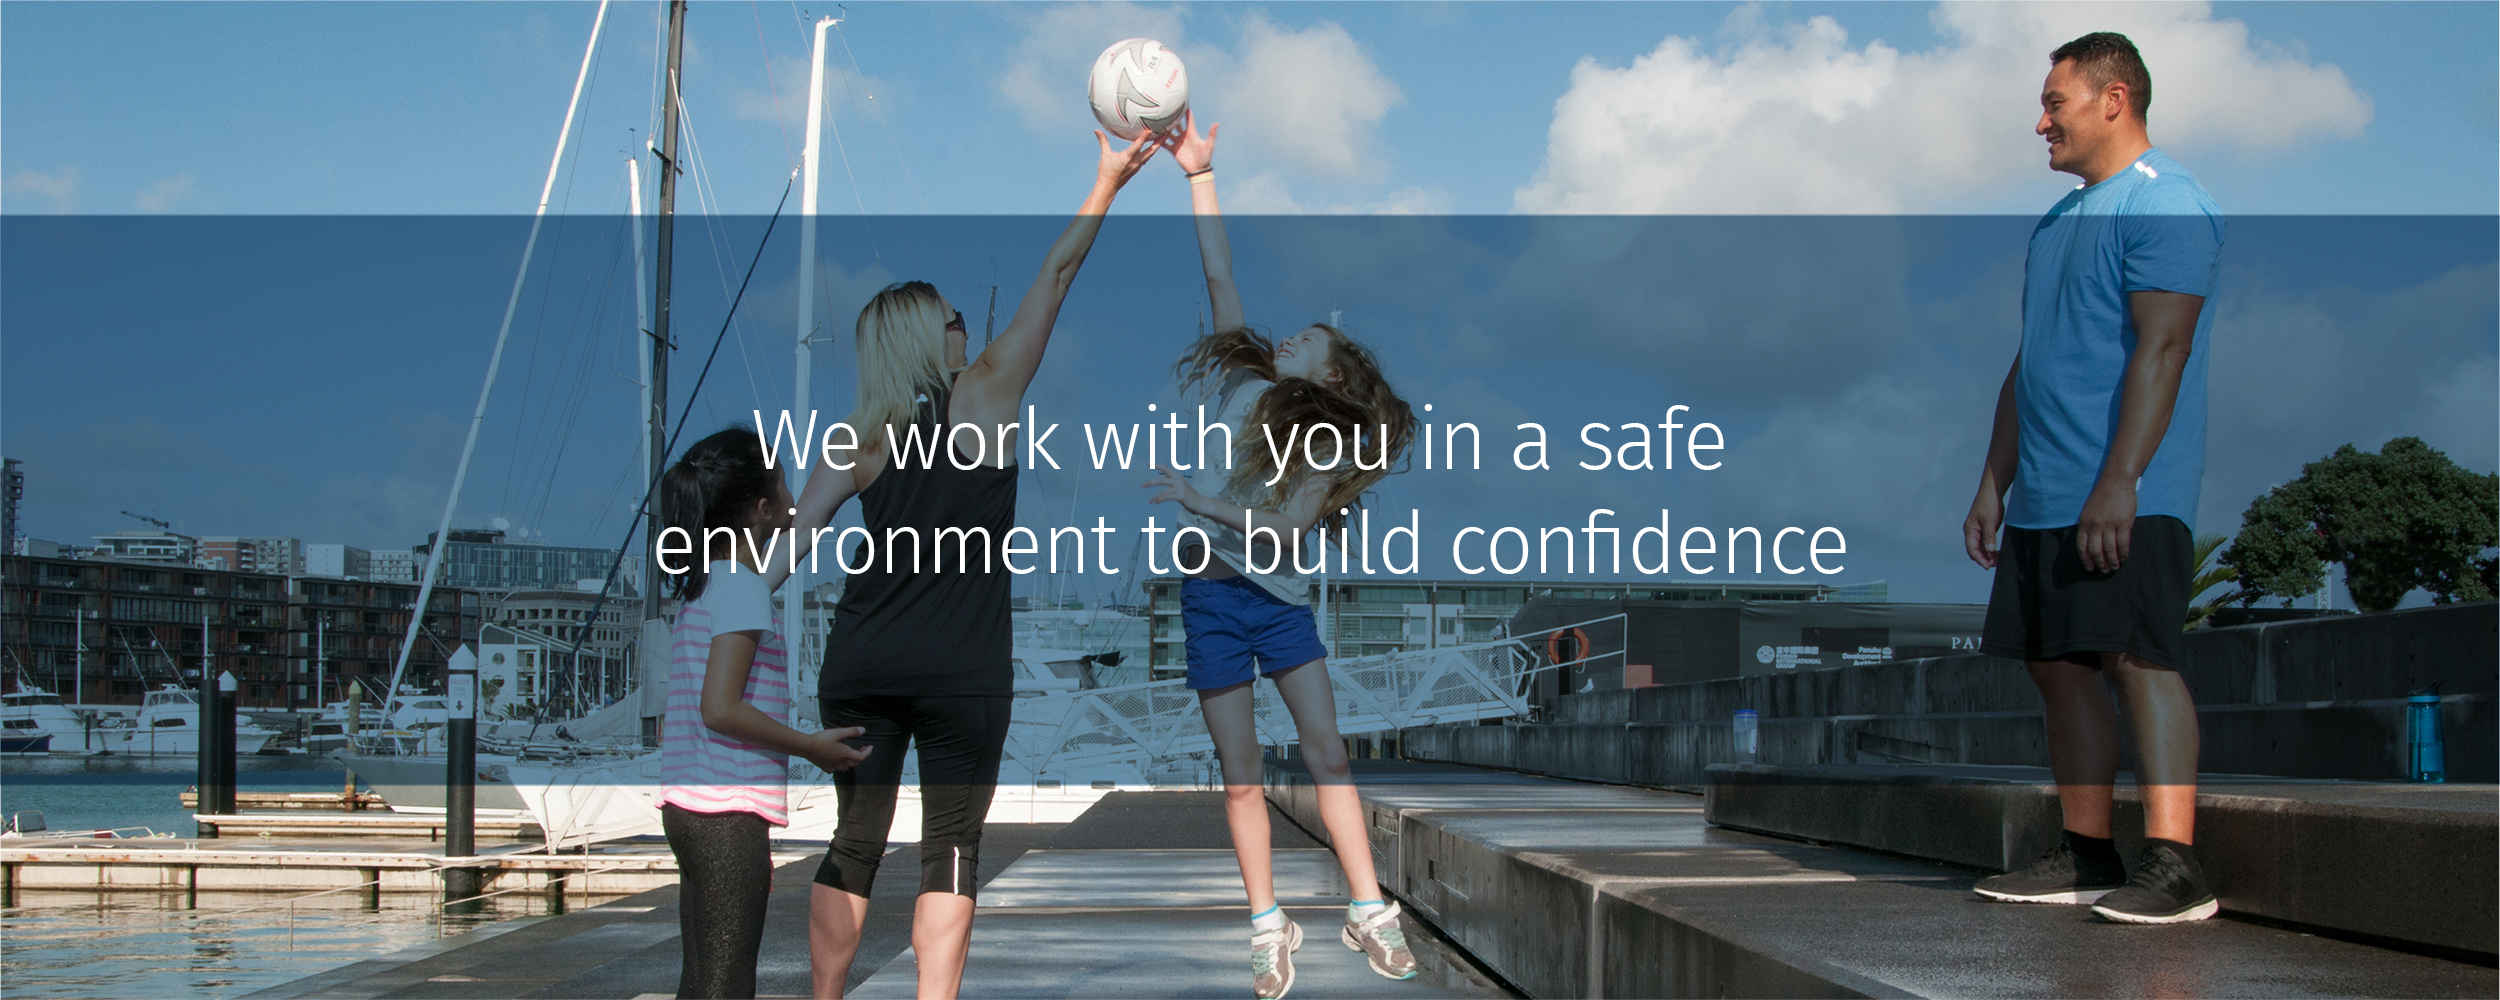 We work with you in a safe environment to build CONFIDENCE